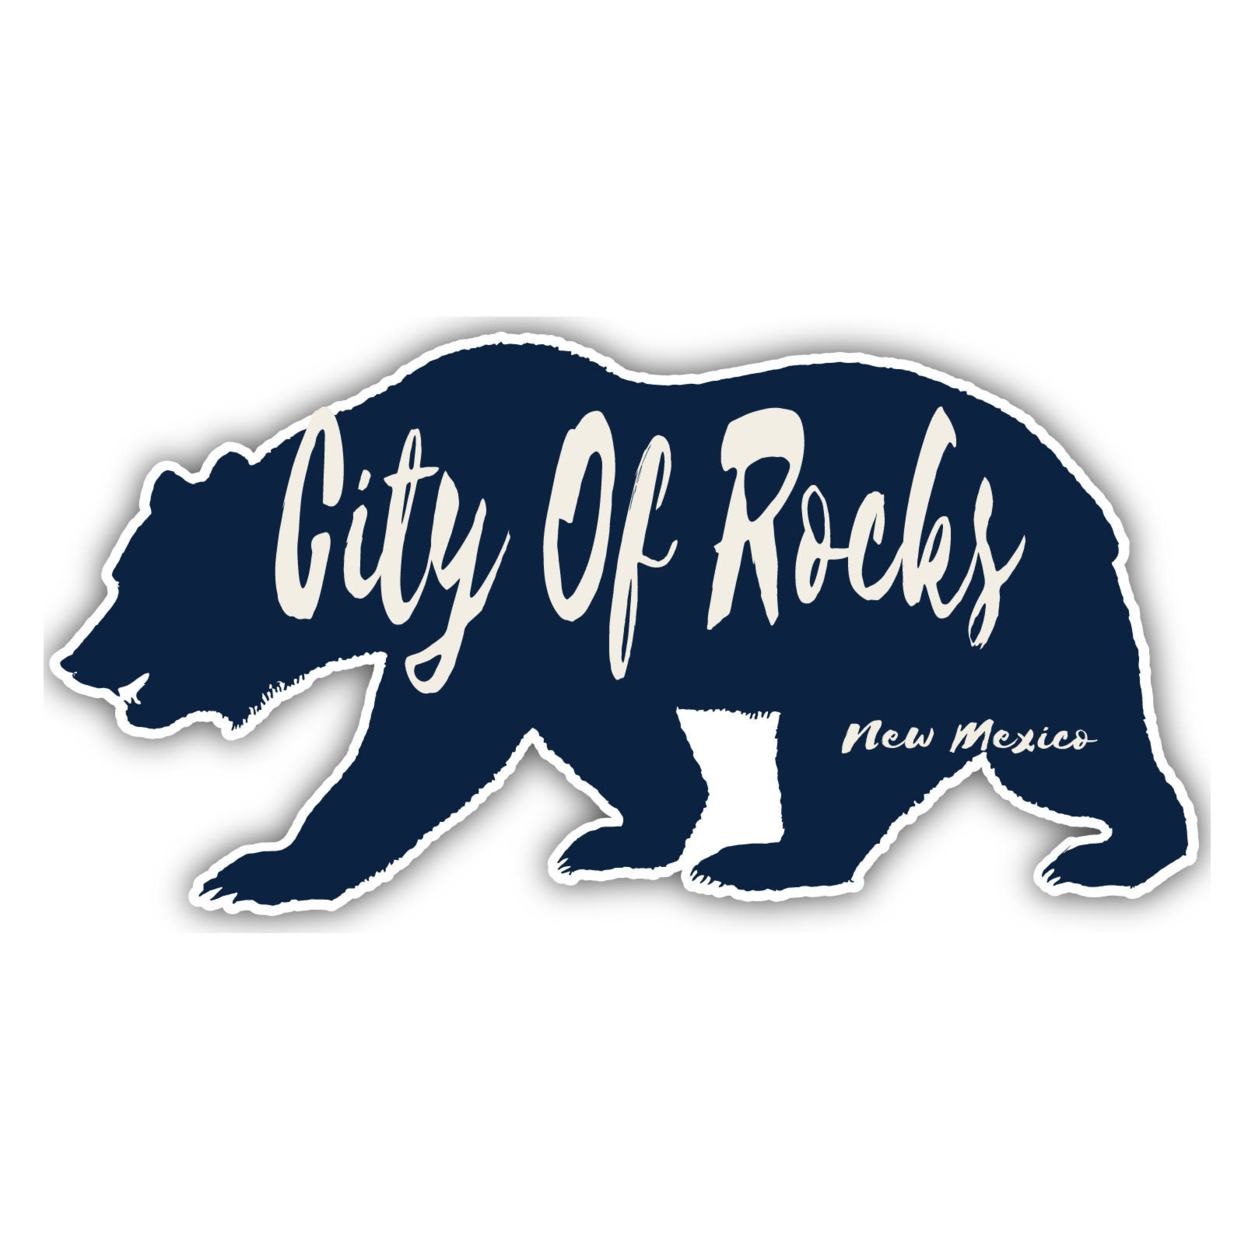 City Of Rocks New Mexico Souvenir Decorative Stickers (Choose Theme And Size) - 4-Pack, 4-Inch, Bear